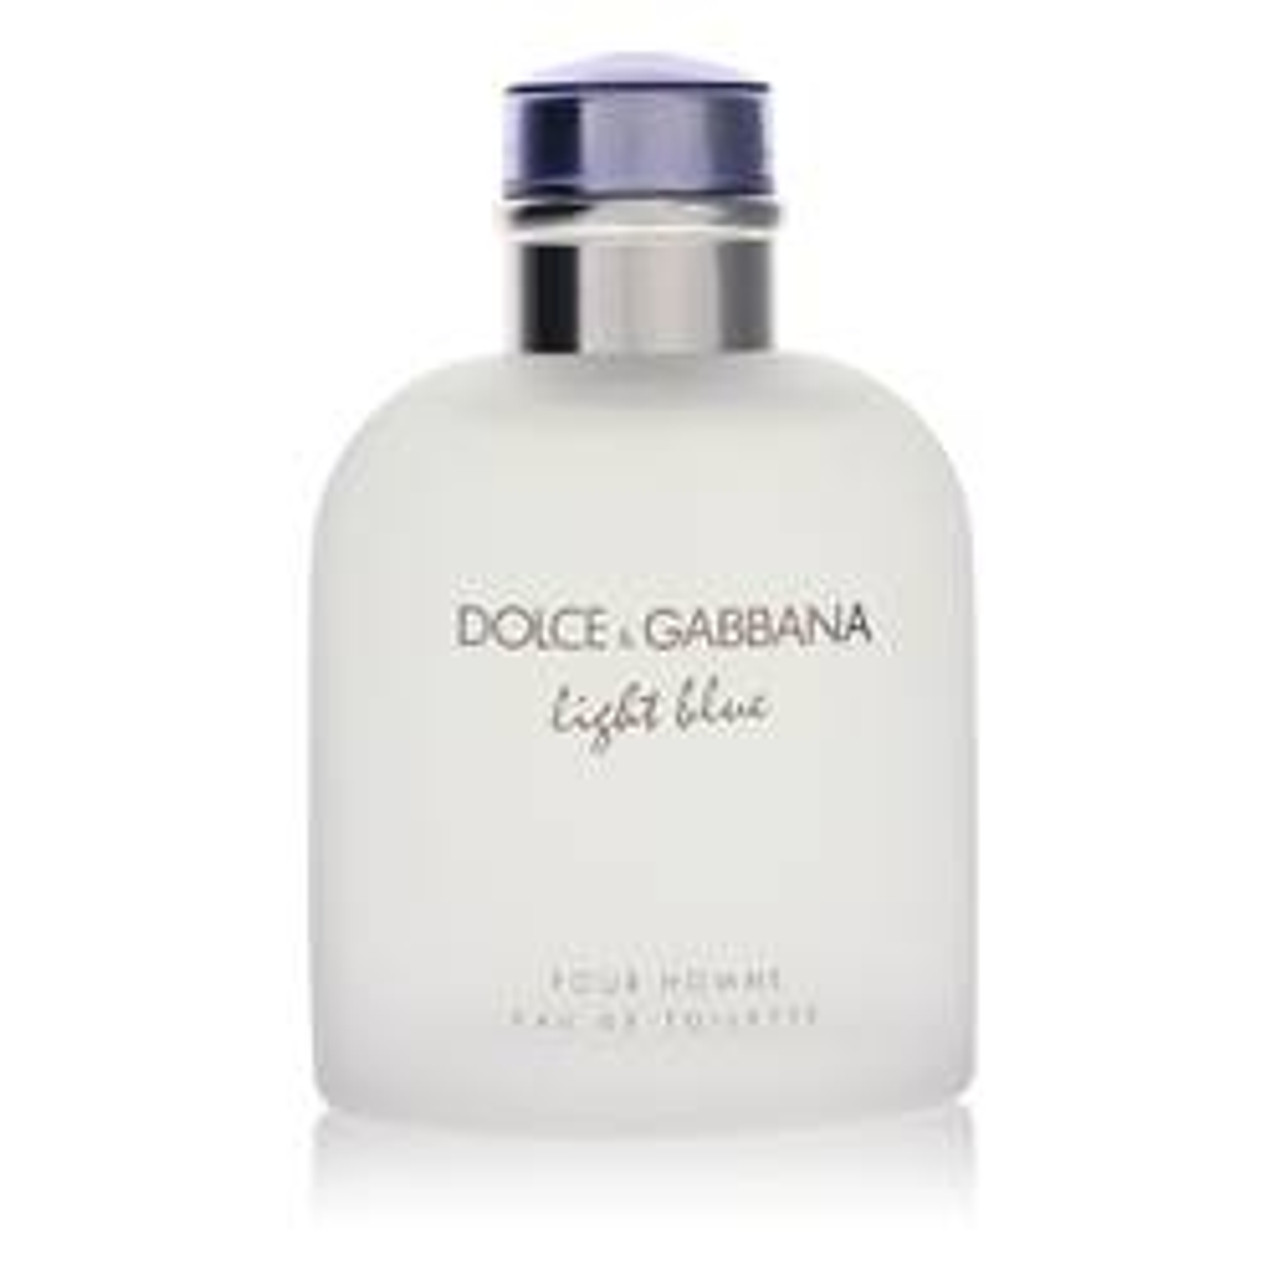 Light Blue Cologne By Dolce & Gabbana Eau De Toilette Spray (Tester) 4.2 oz for Men - [From 128.00 - Choose pk Qty ] - *Ships from Miami